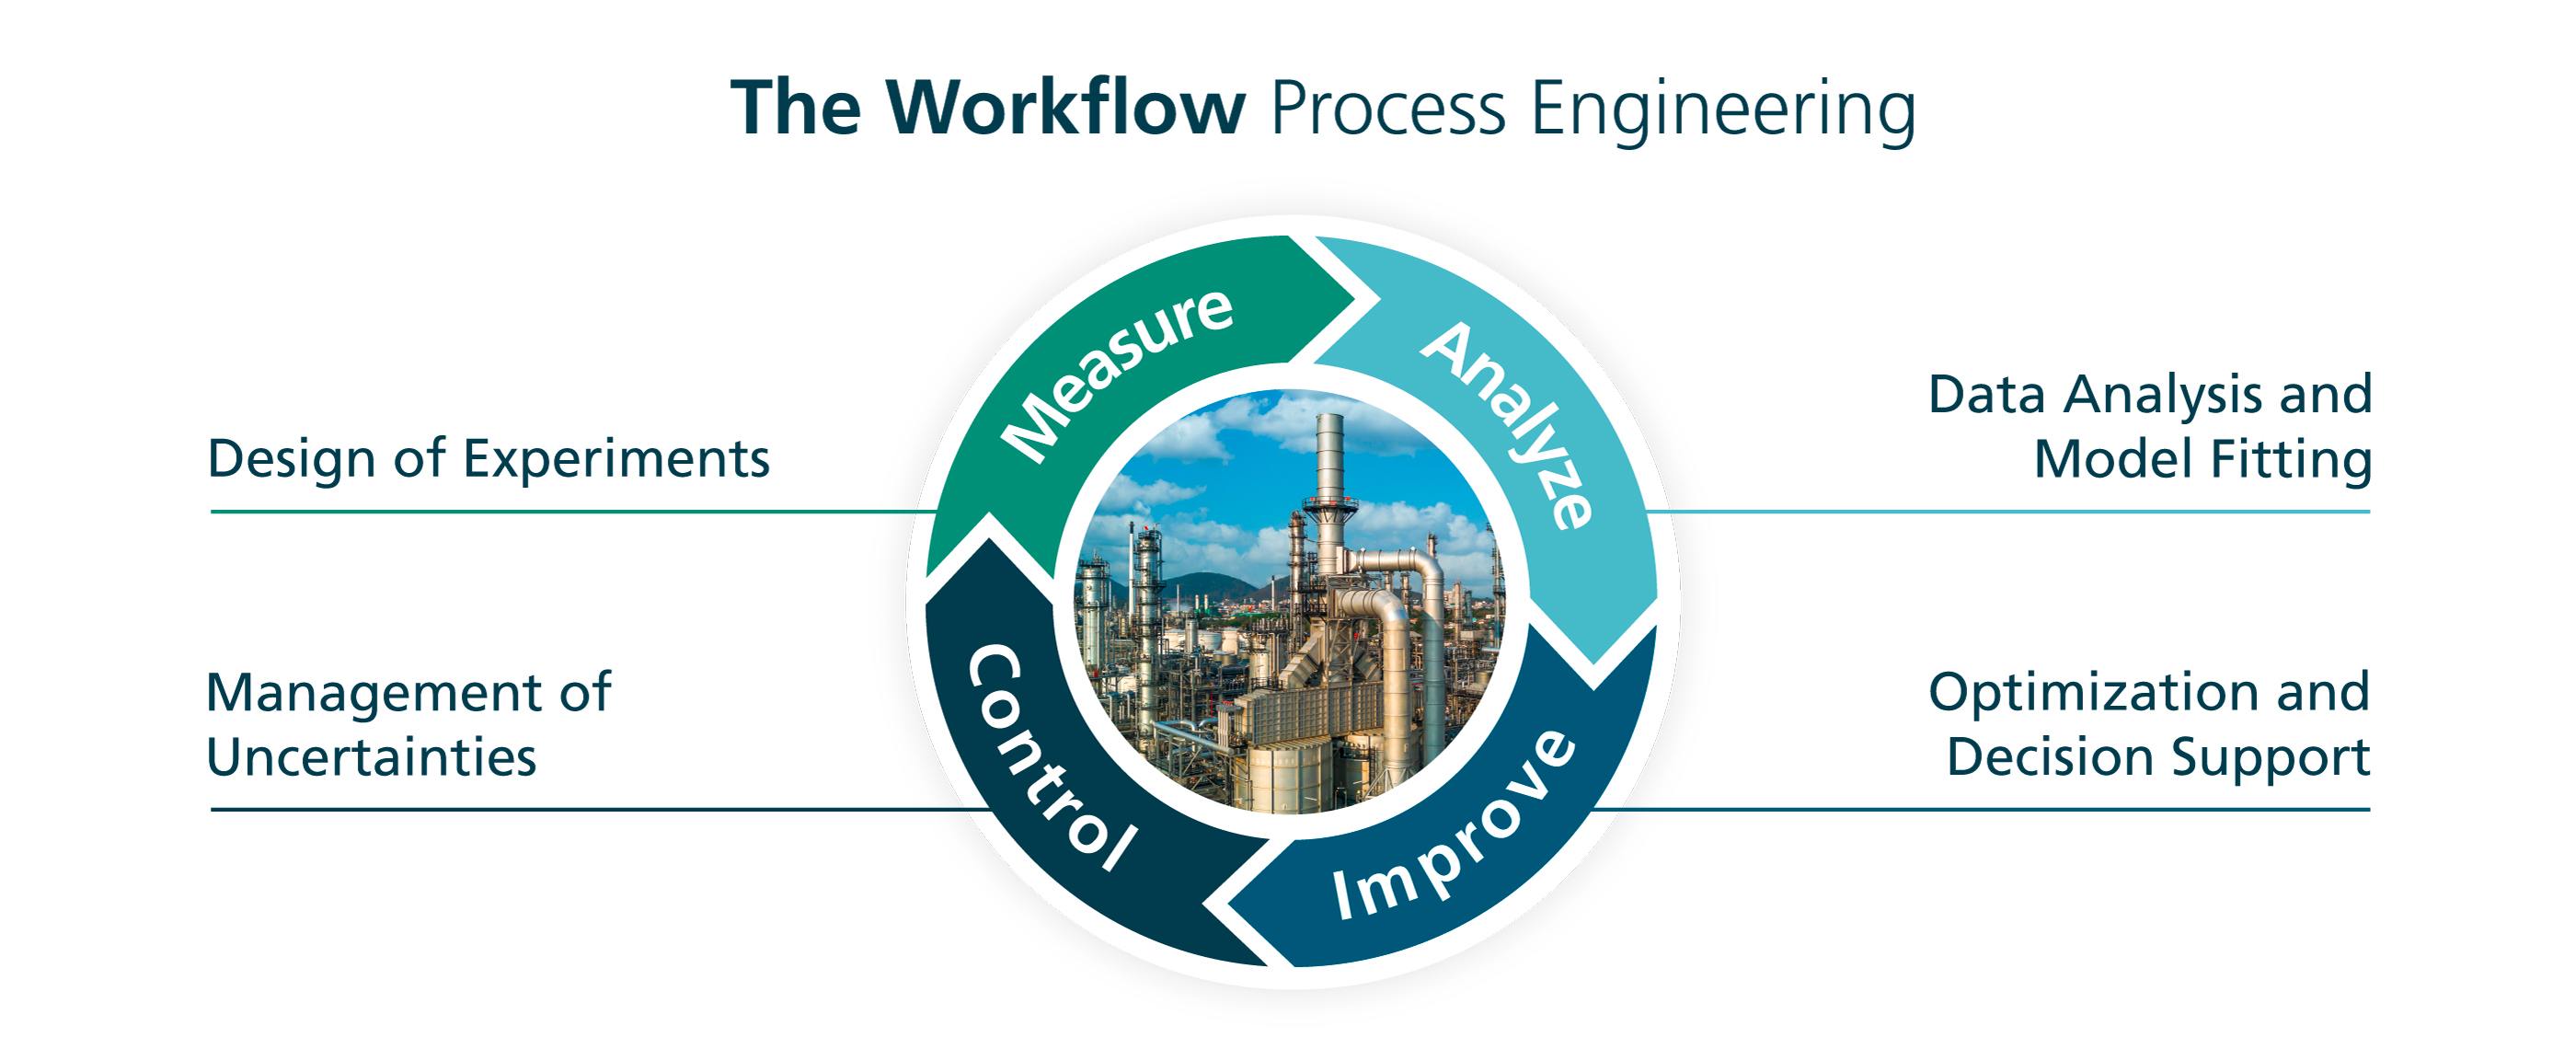 The Workflo Process Engineering